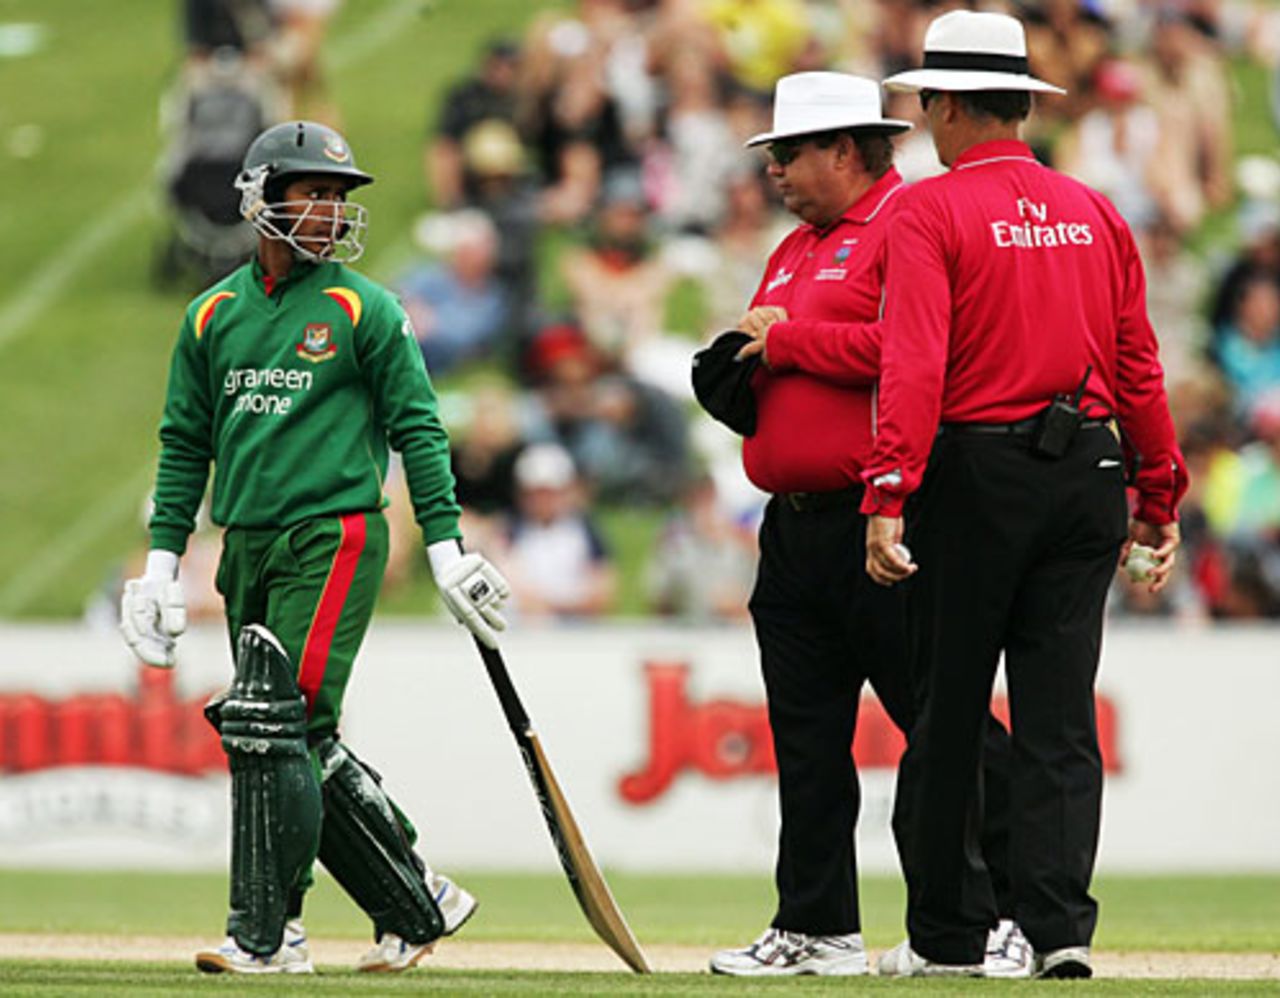 An unhappy Mohammad Ashraful walks back after an appeal for a doubtful catch was held, New Zealand v Bangladesh, 2nd ODI, Napier, December 28, 2007